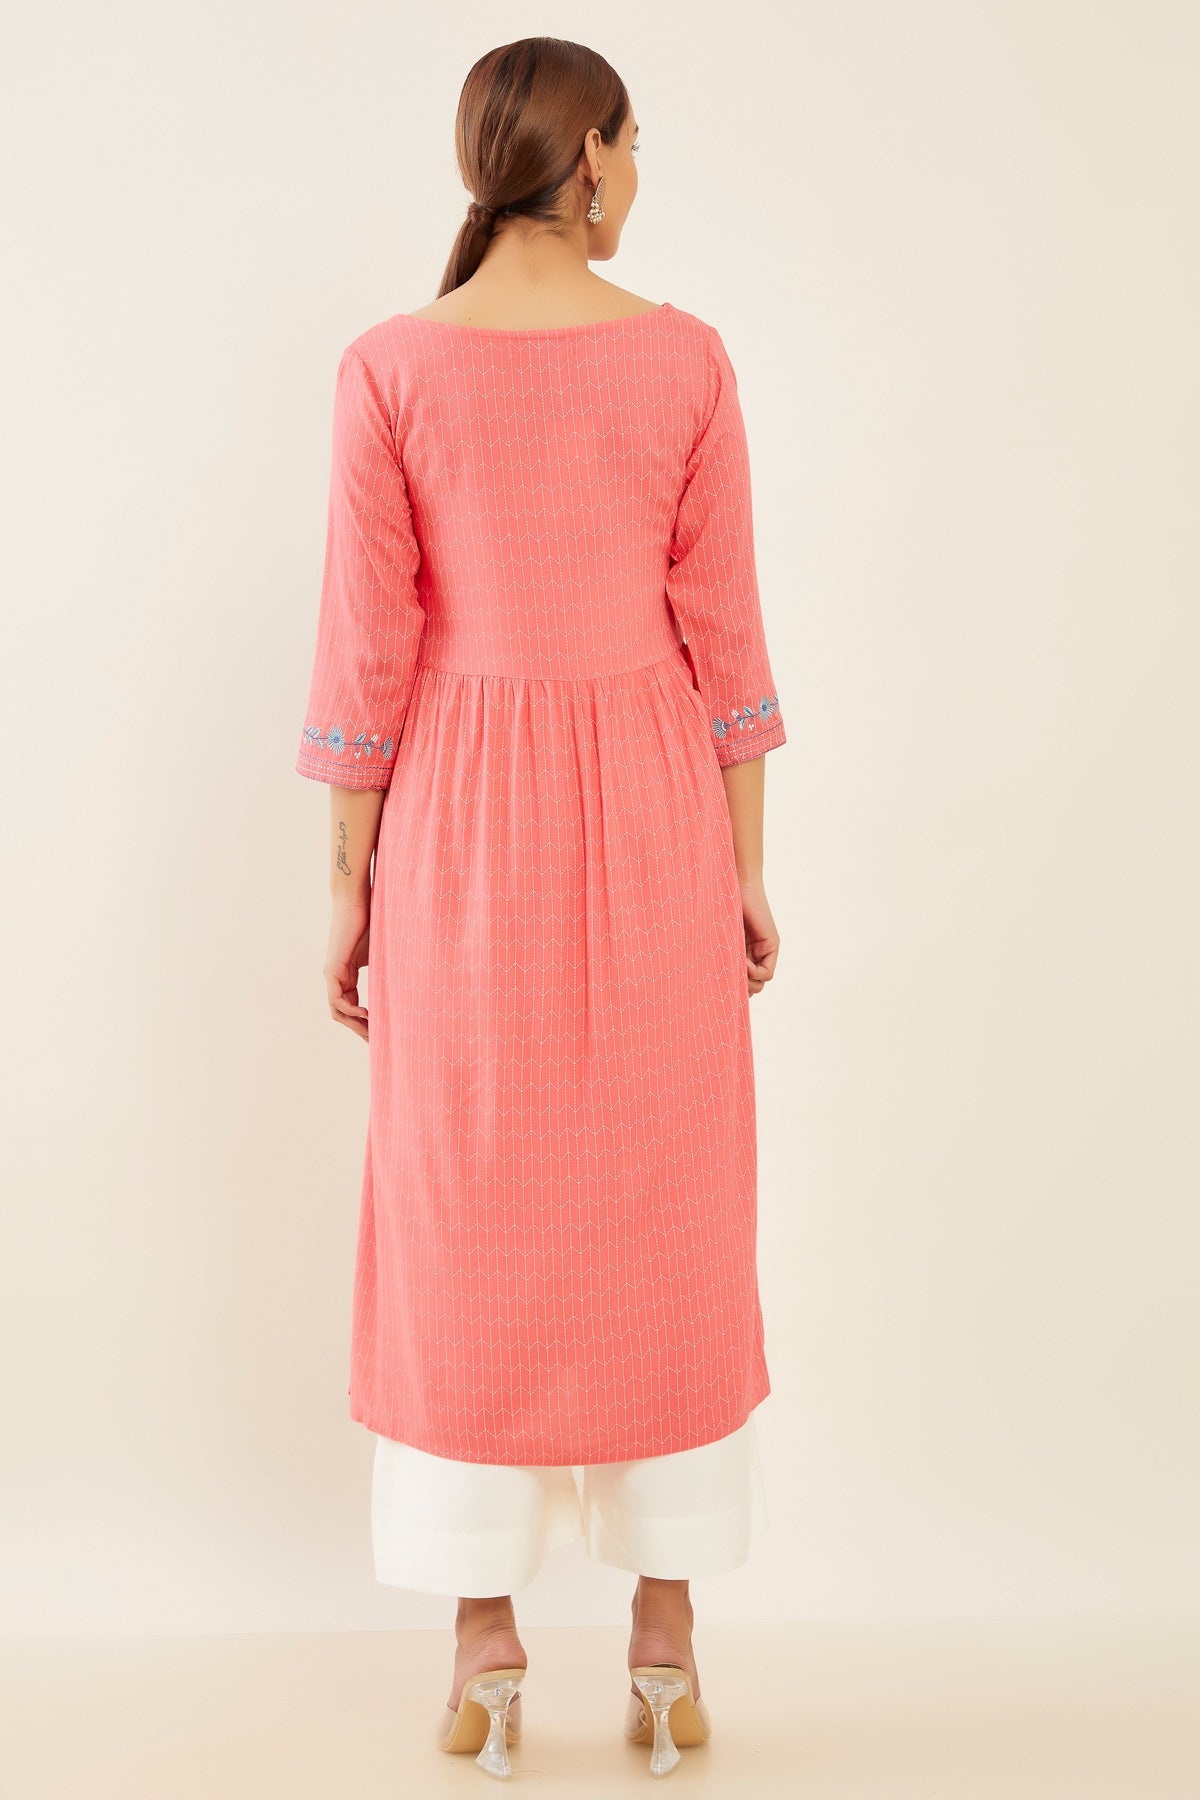 Contrast Foil Mirror Embroidered A Line Pleated Kurta Pink